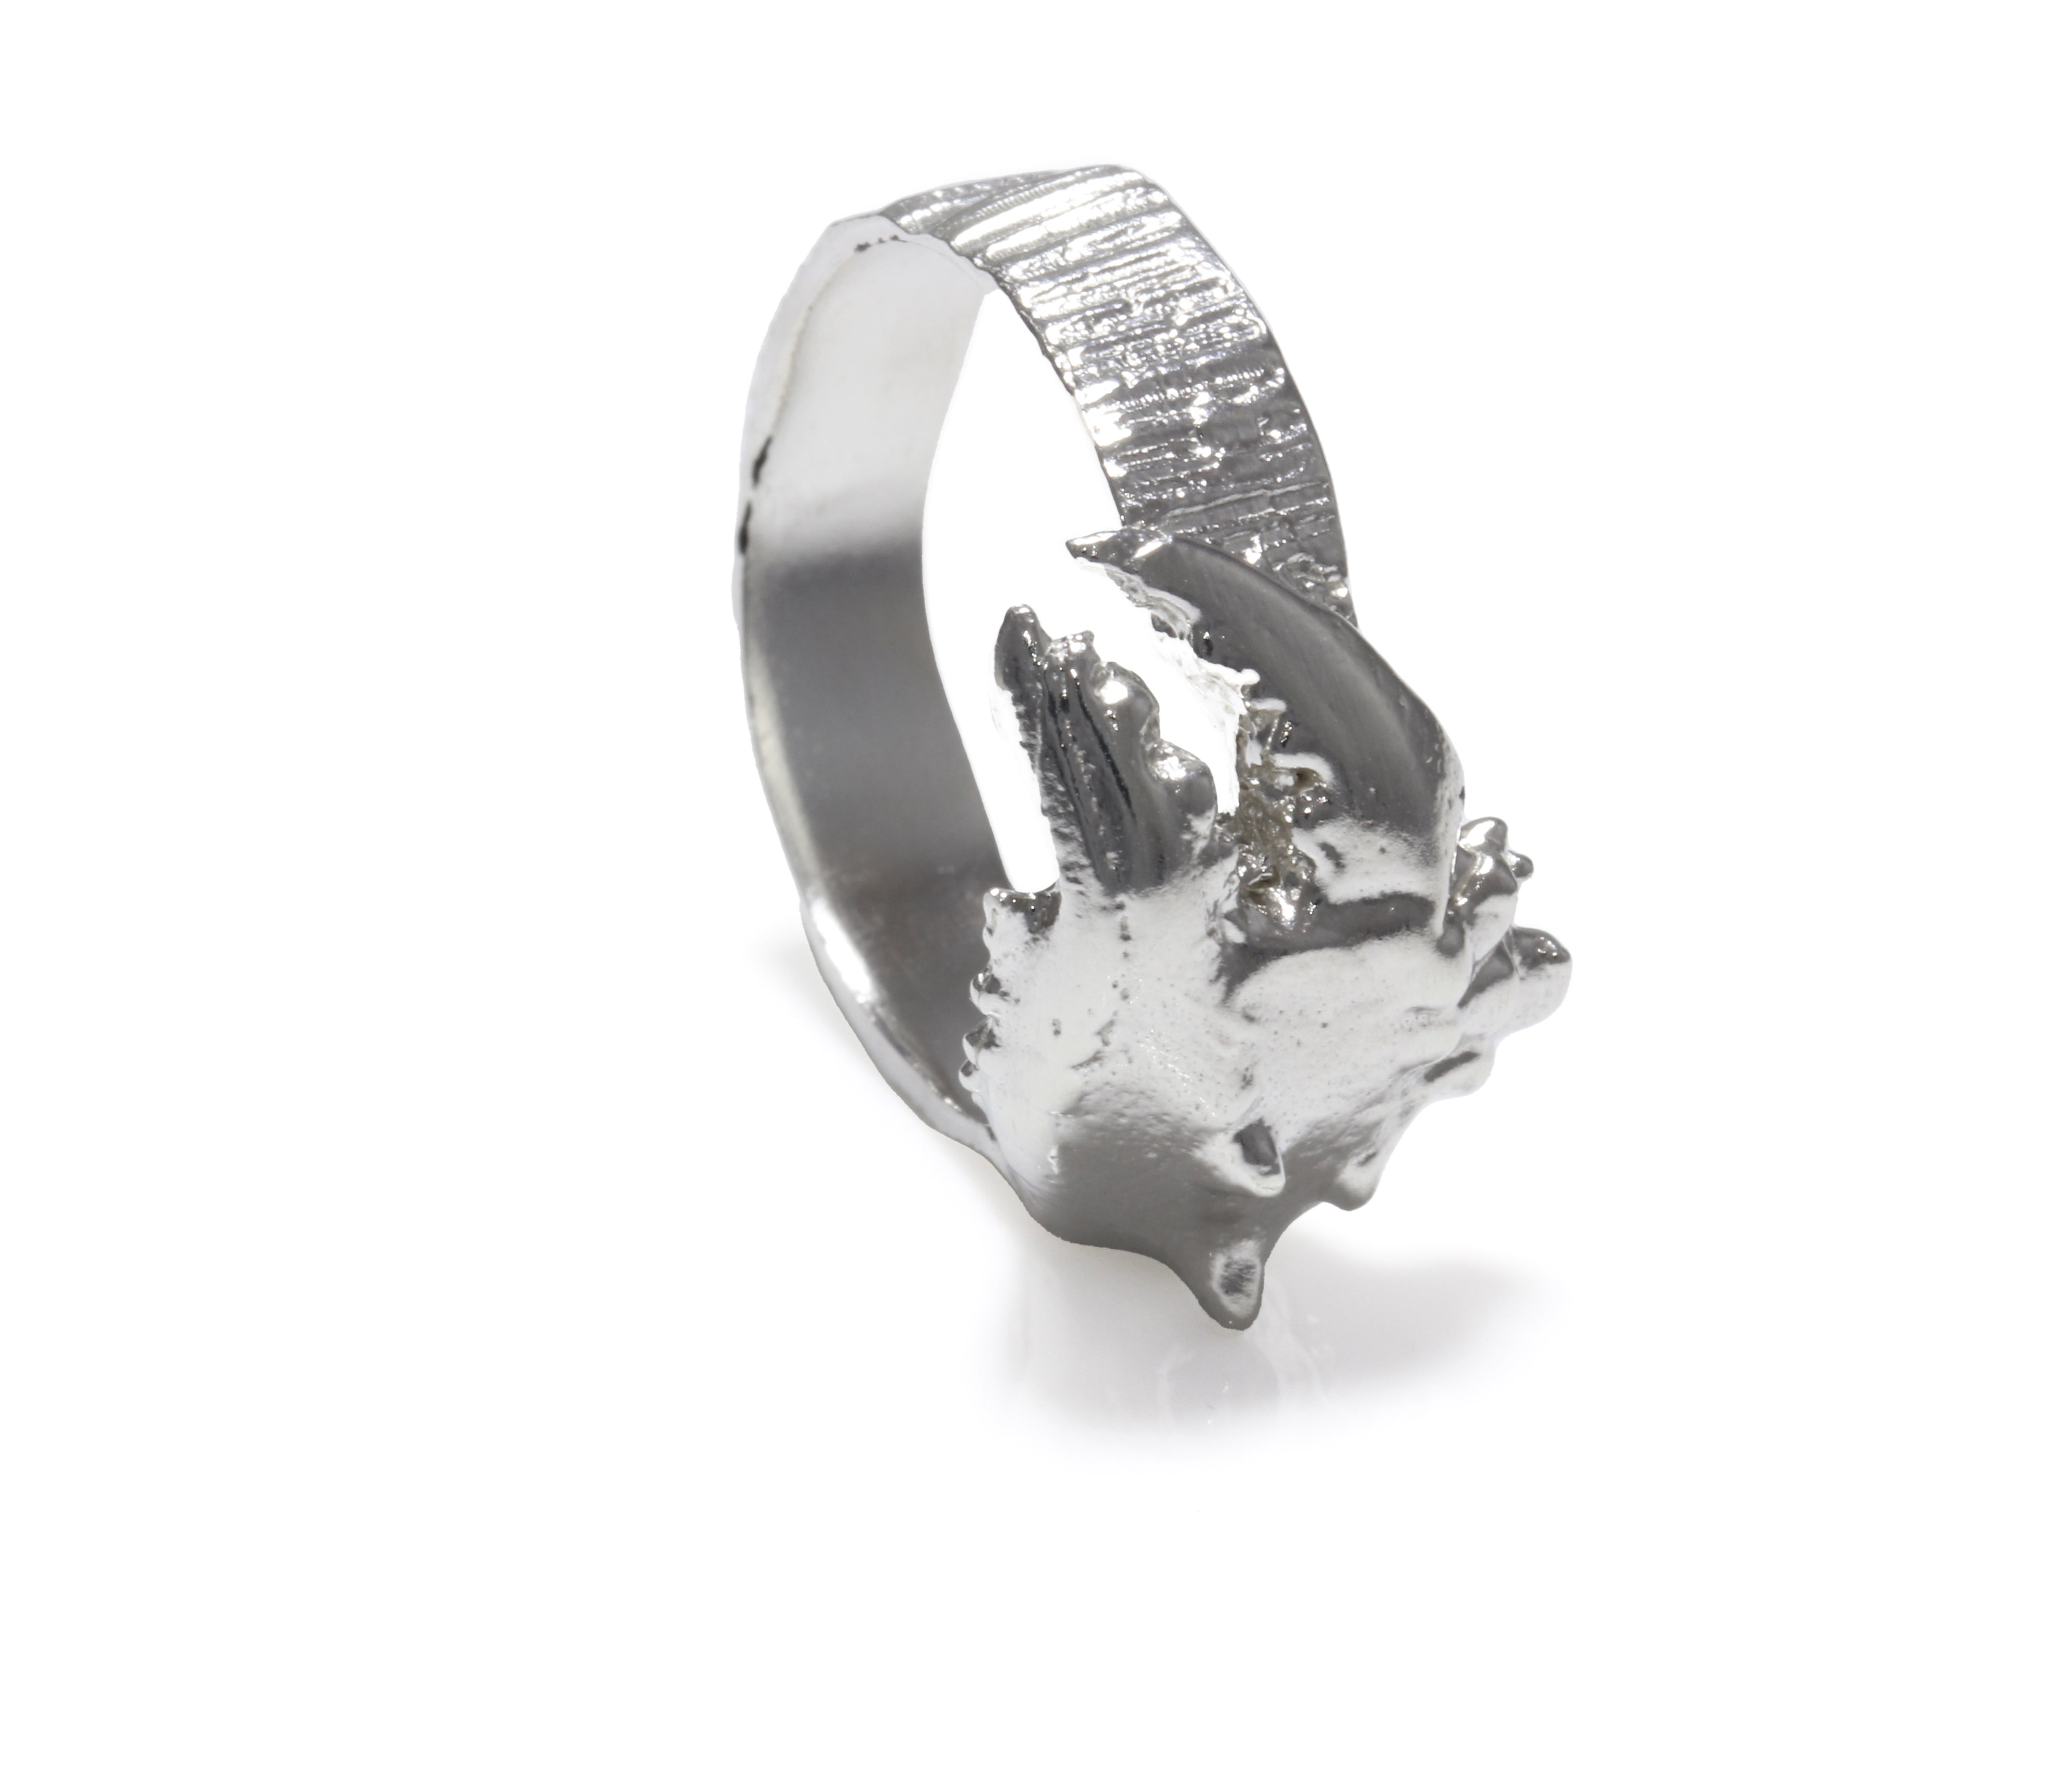 Statement crab claw ring in silver. Rock and roll style